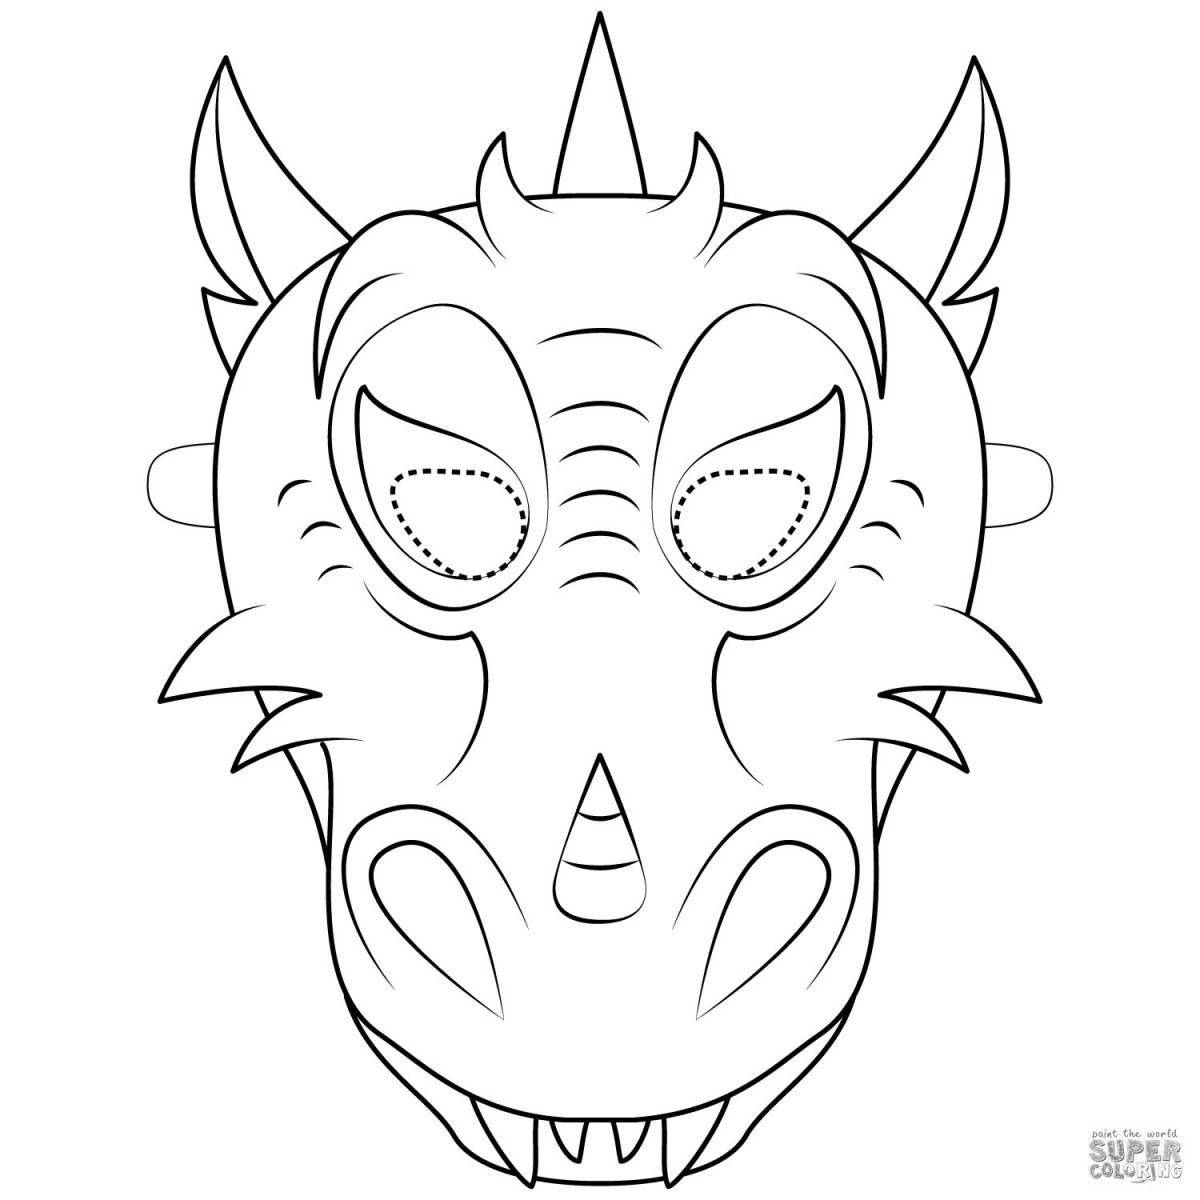 Adorable dinosaur mask coloring page